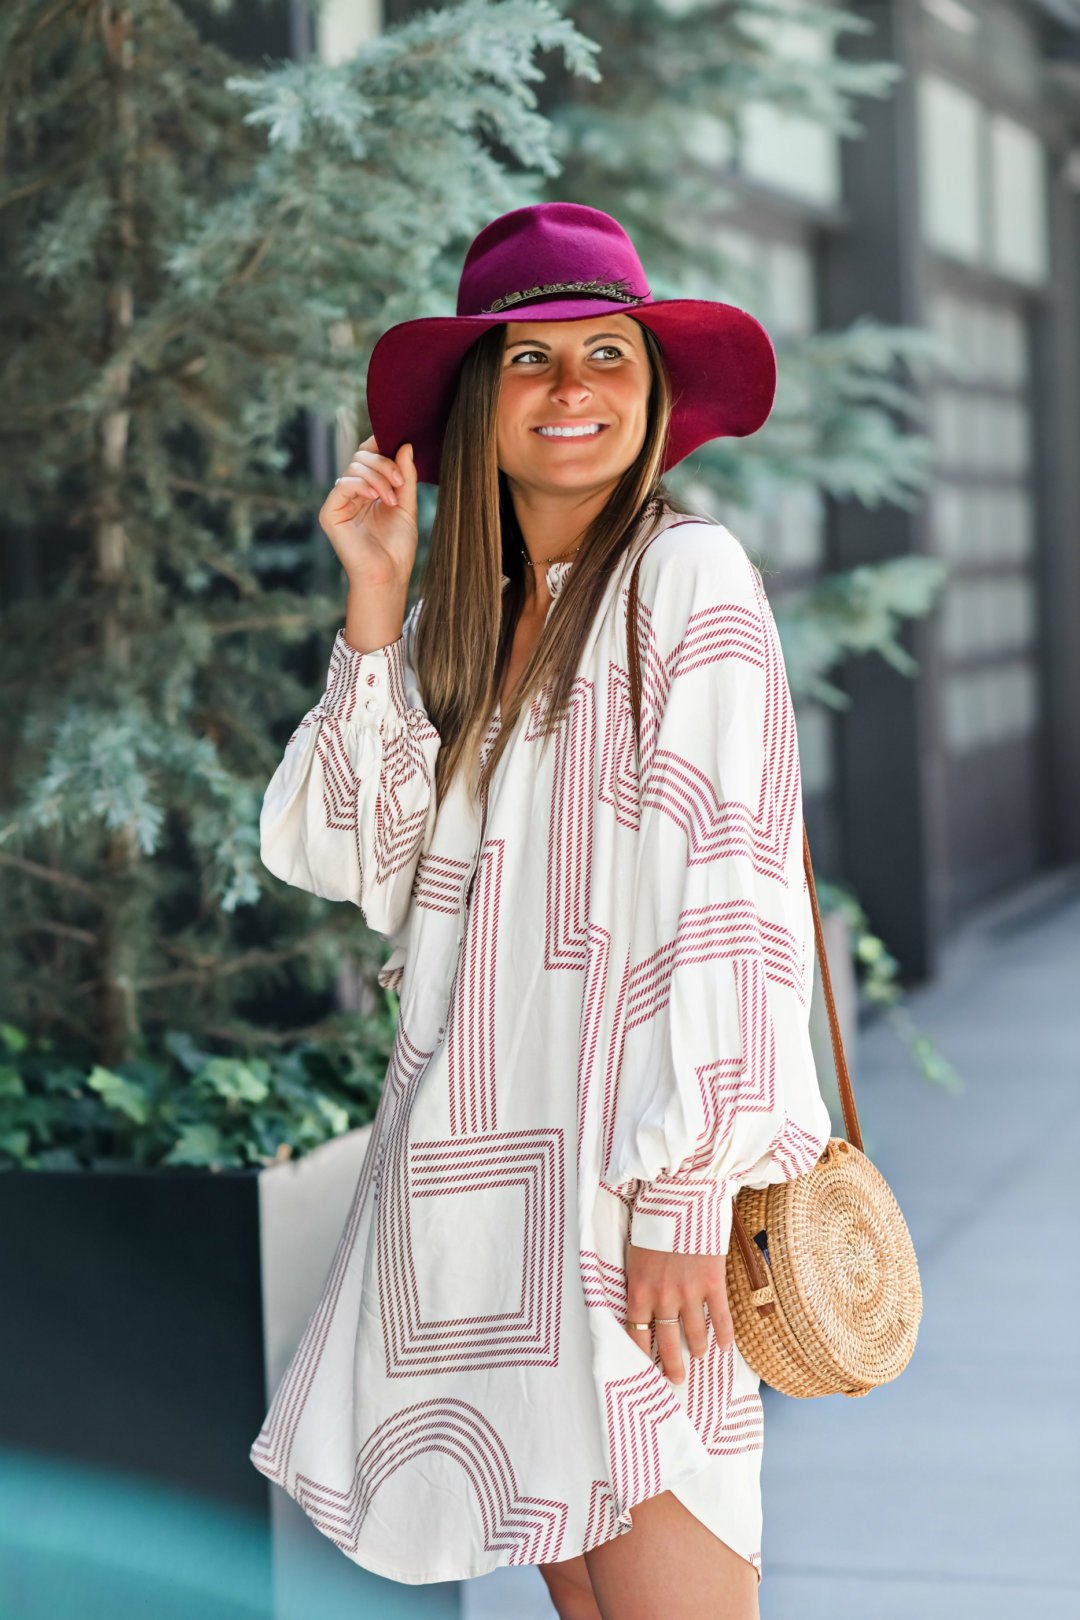 Seasonal Style With Tenth Street Hats - To Be Bright